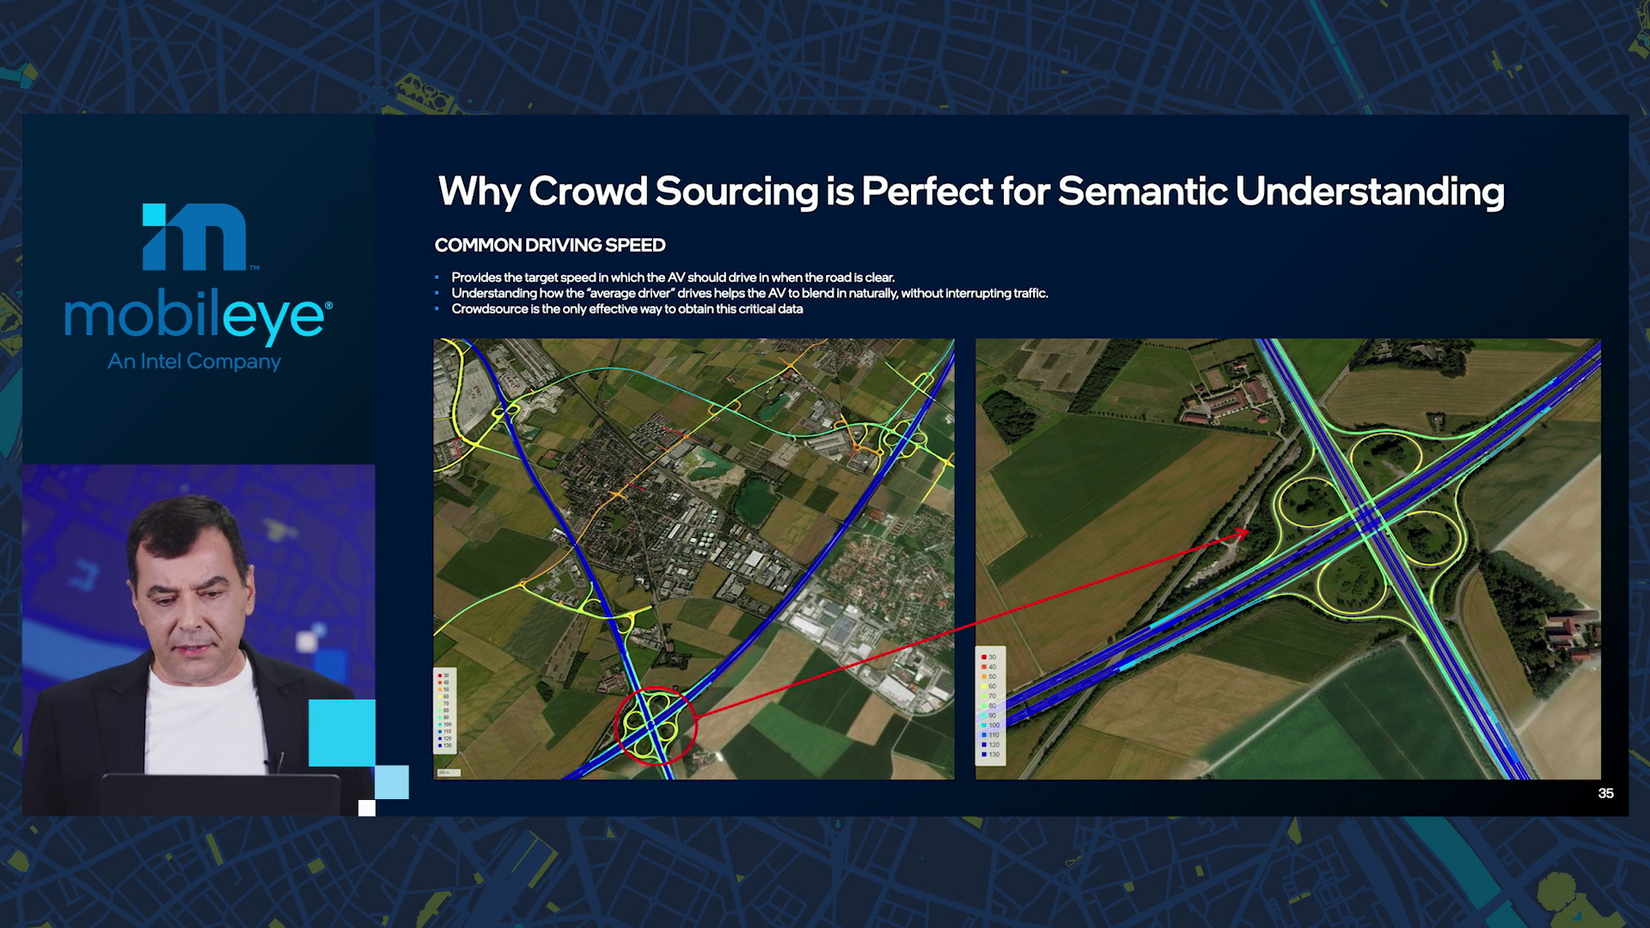 Why crowd sourcing is perfect for semantic understanding? Part 3